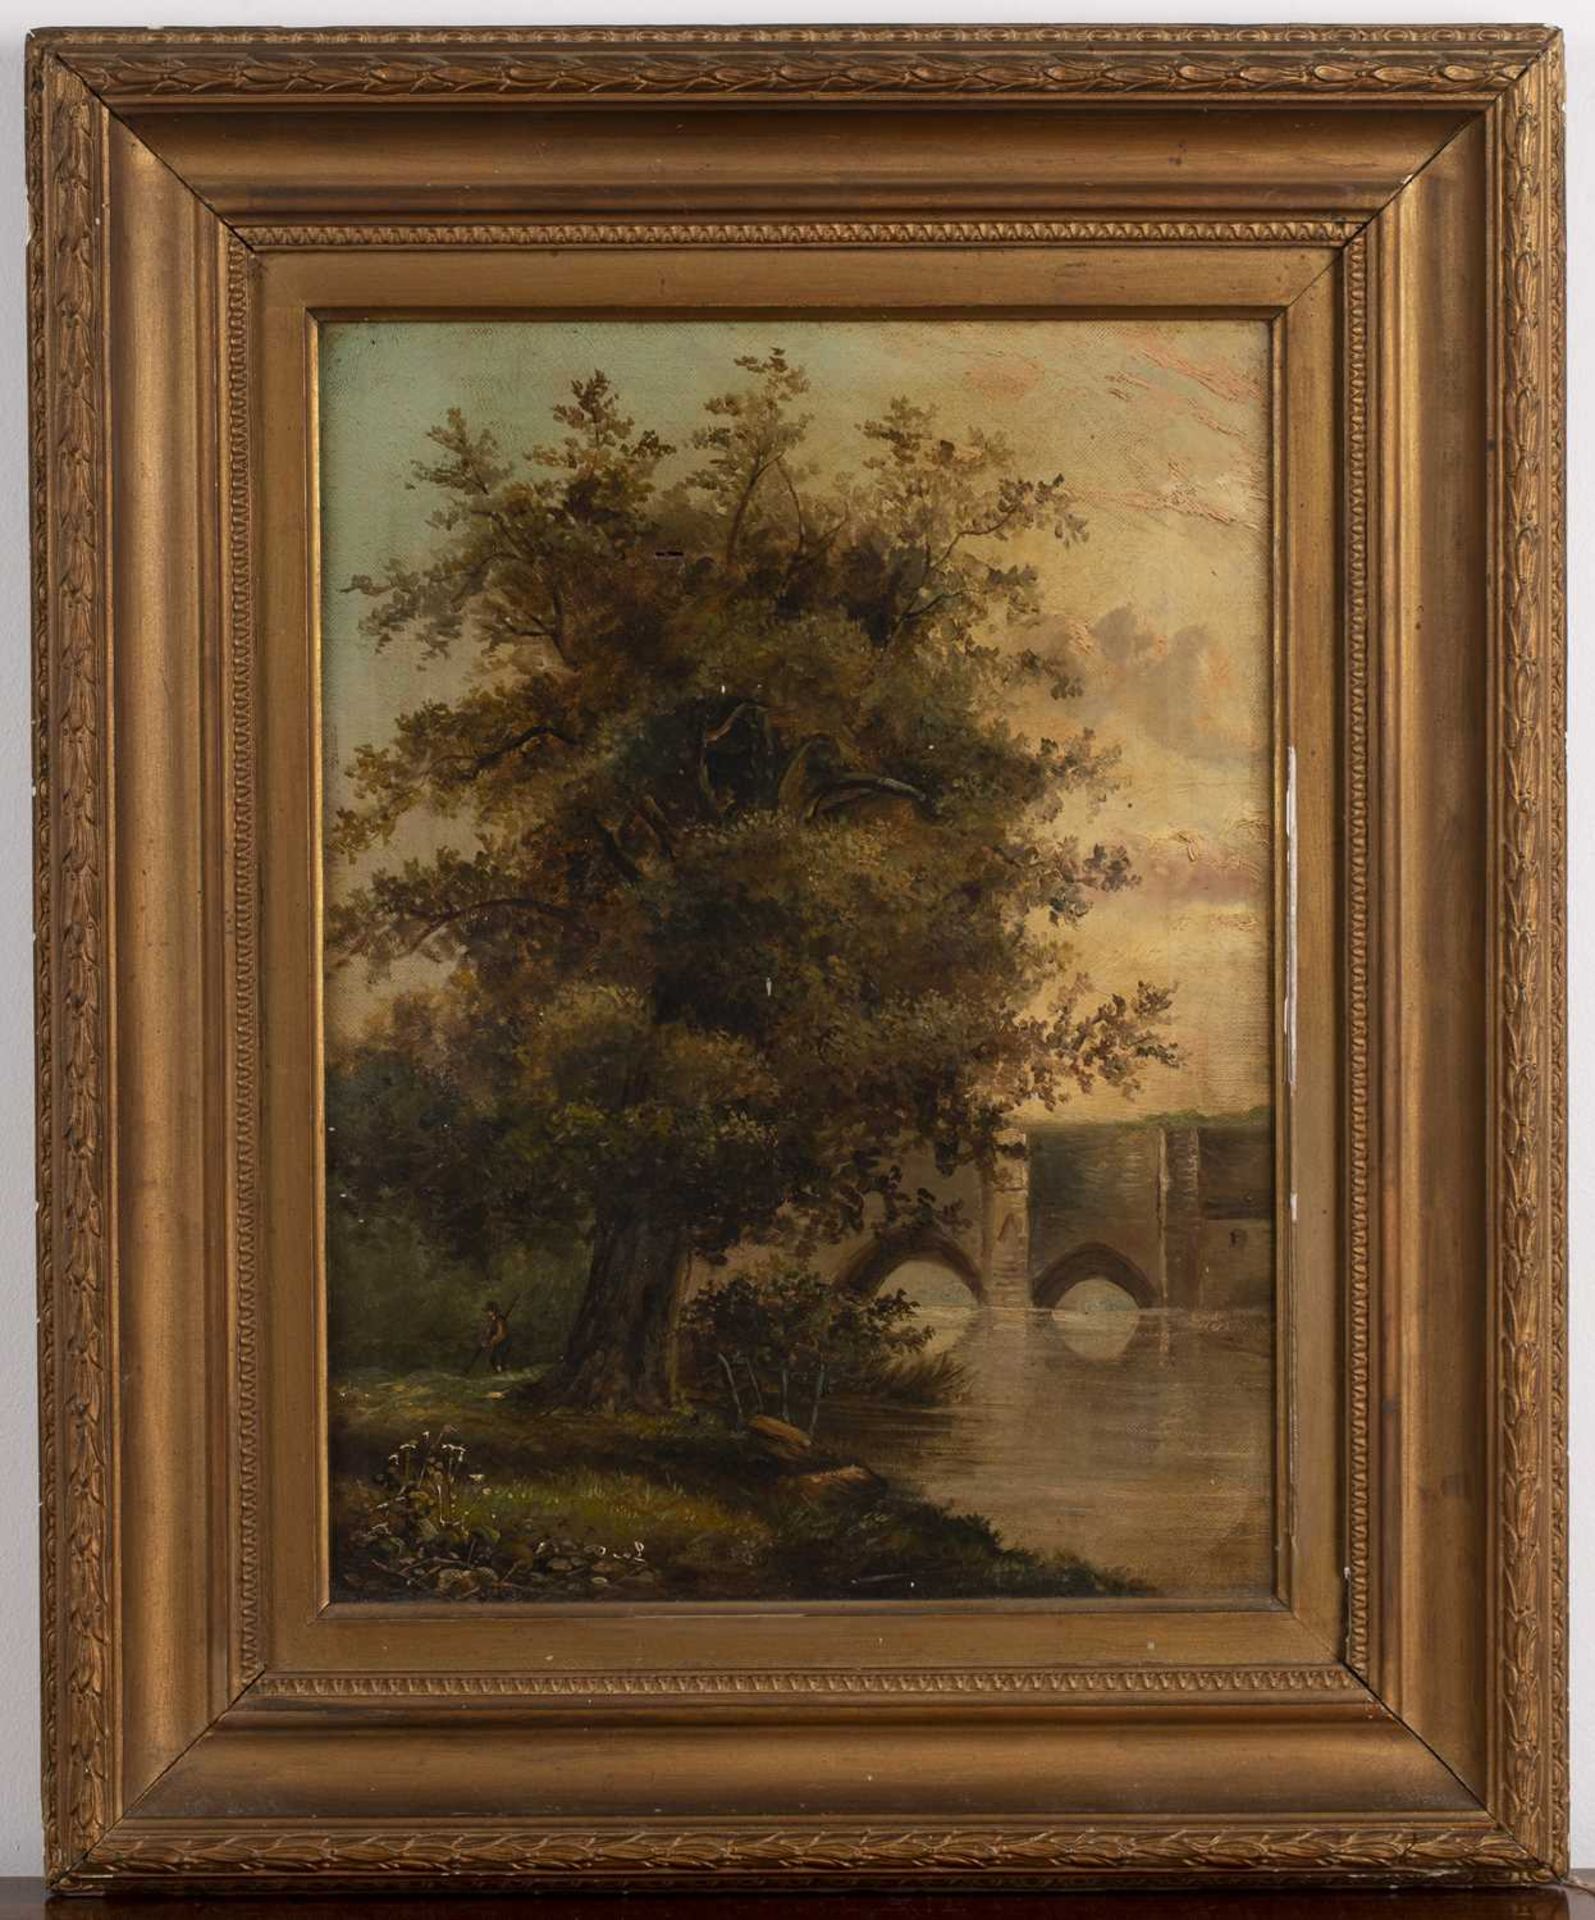 Late 19th/early 20th Century English School 'Study of a figure in a river landscape', oil on canvas, - Image 2 of 3